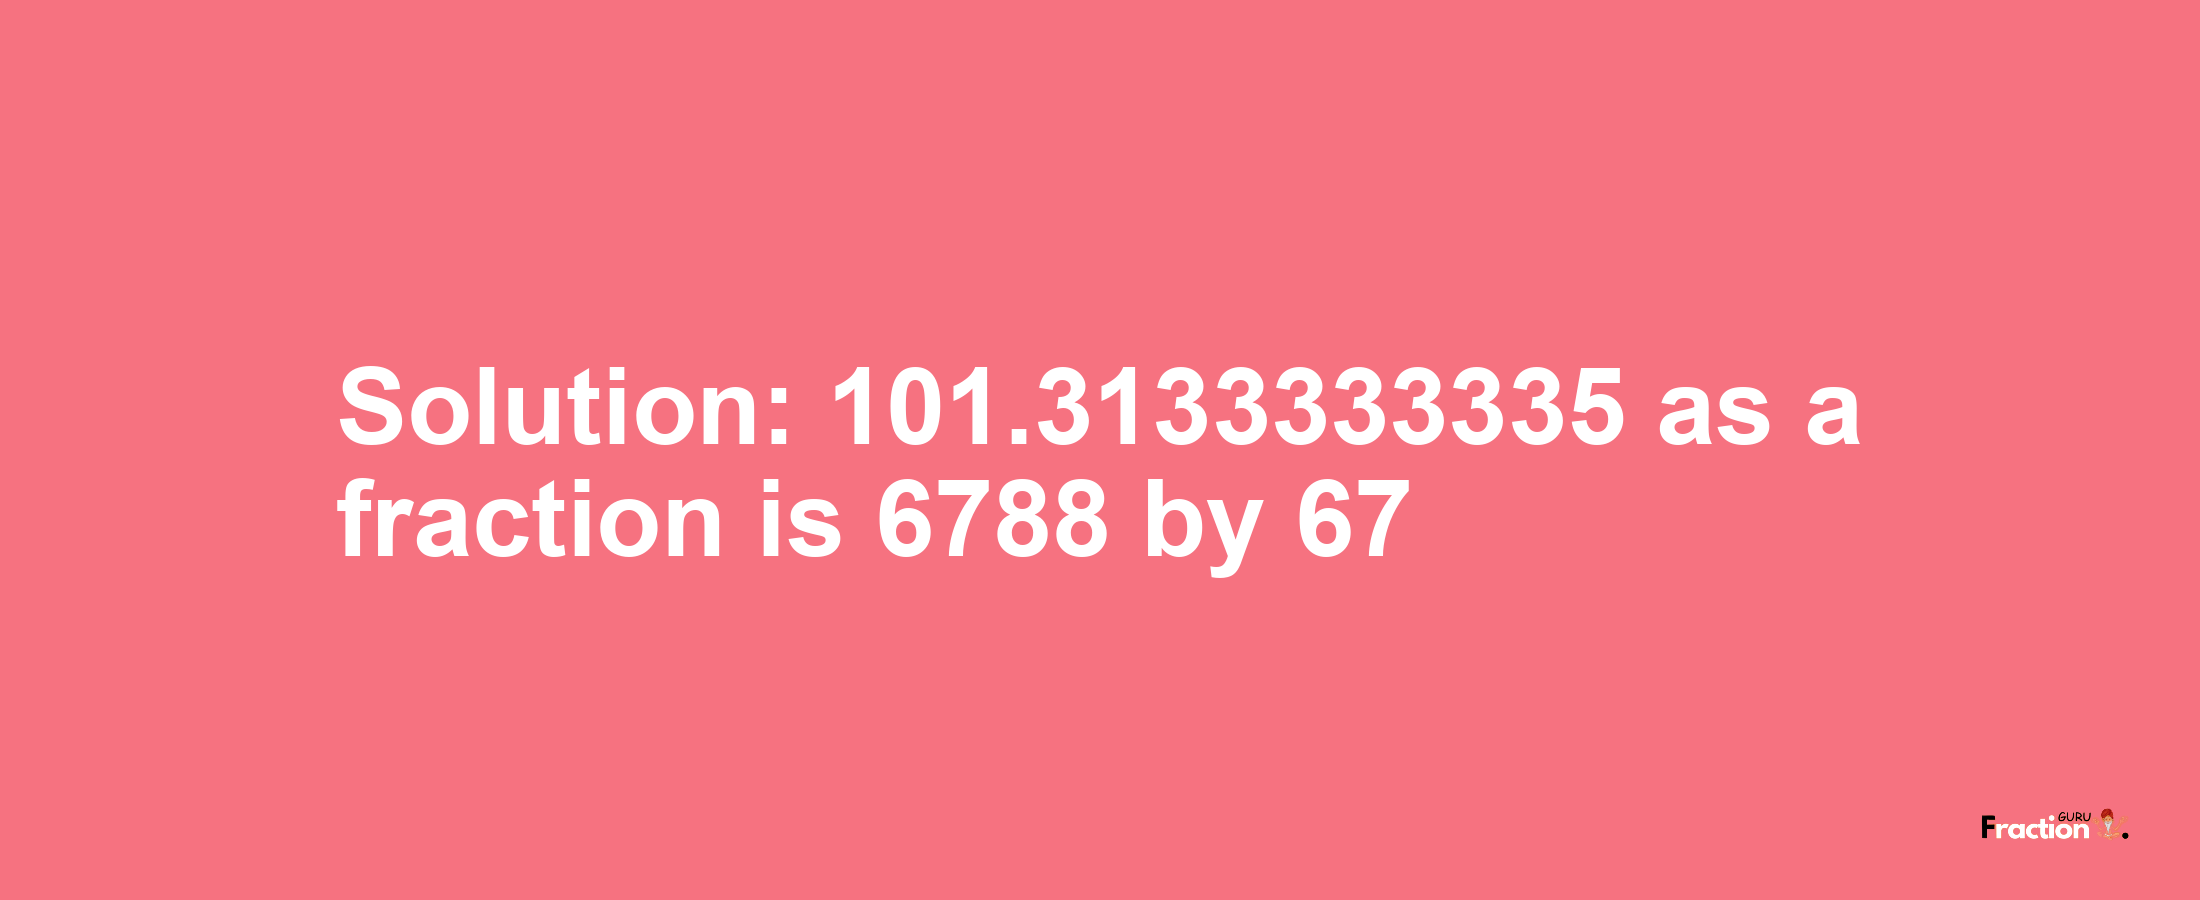 Solution:101.3133333335 as a fraction is 6788/67